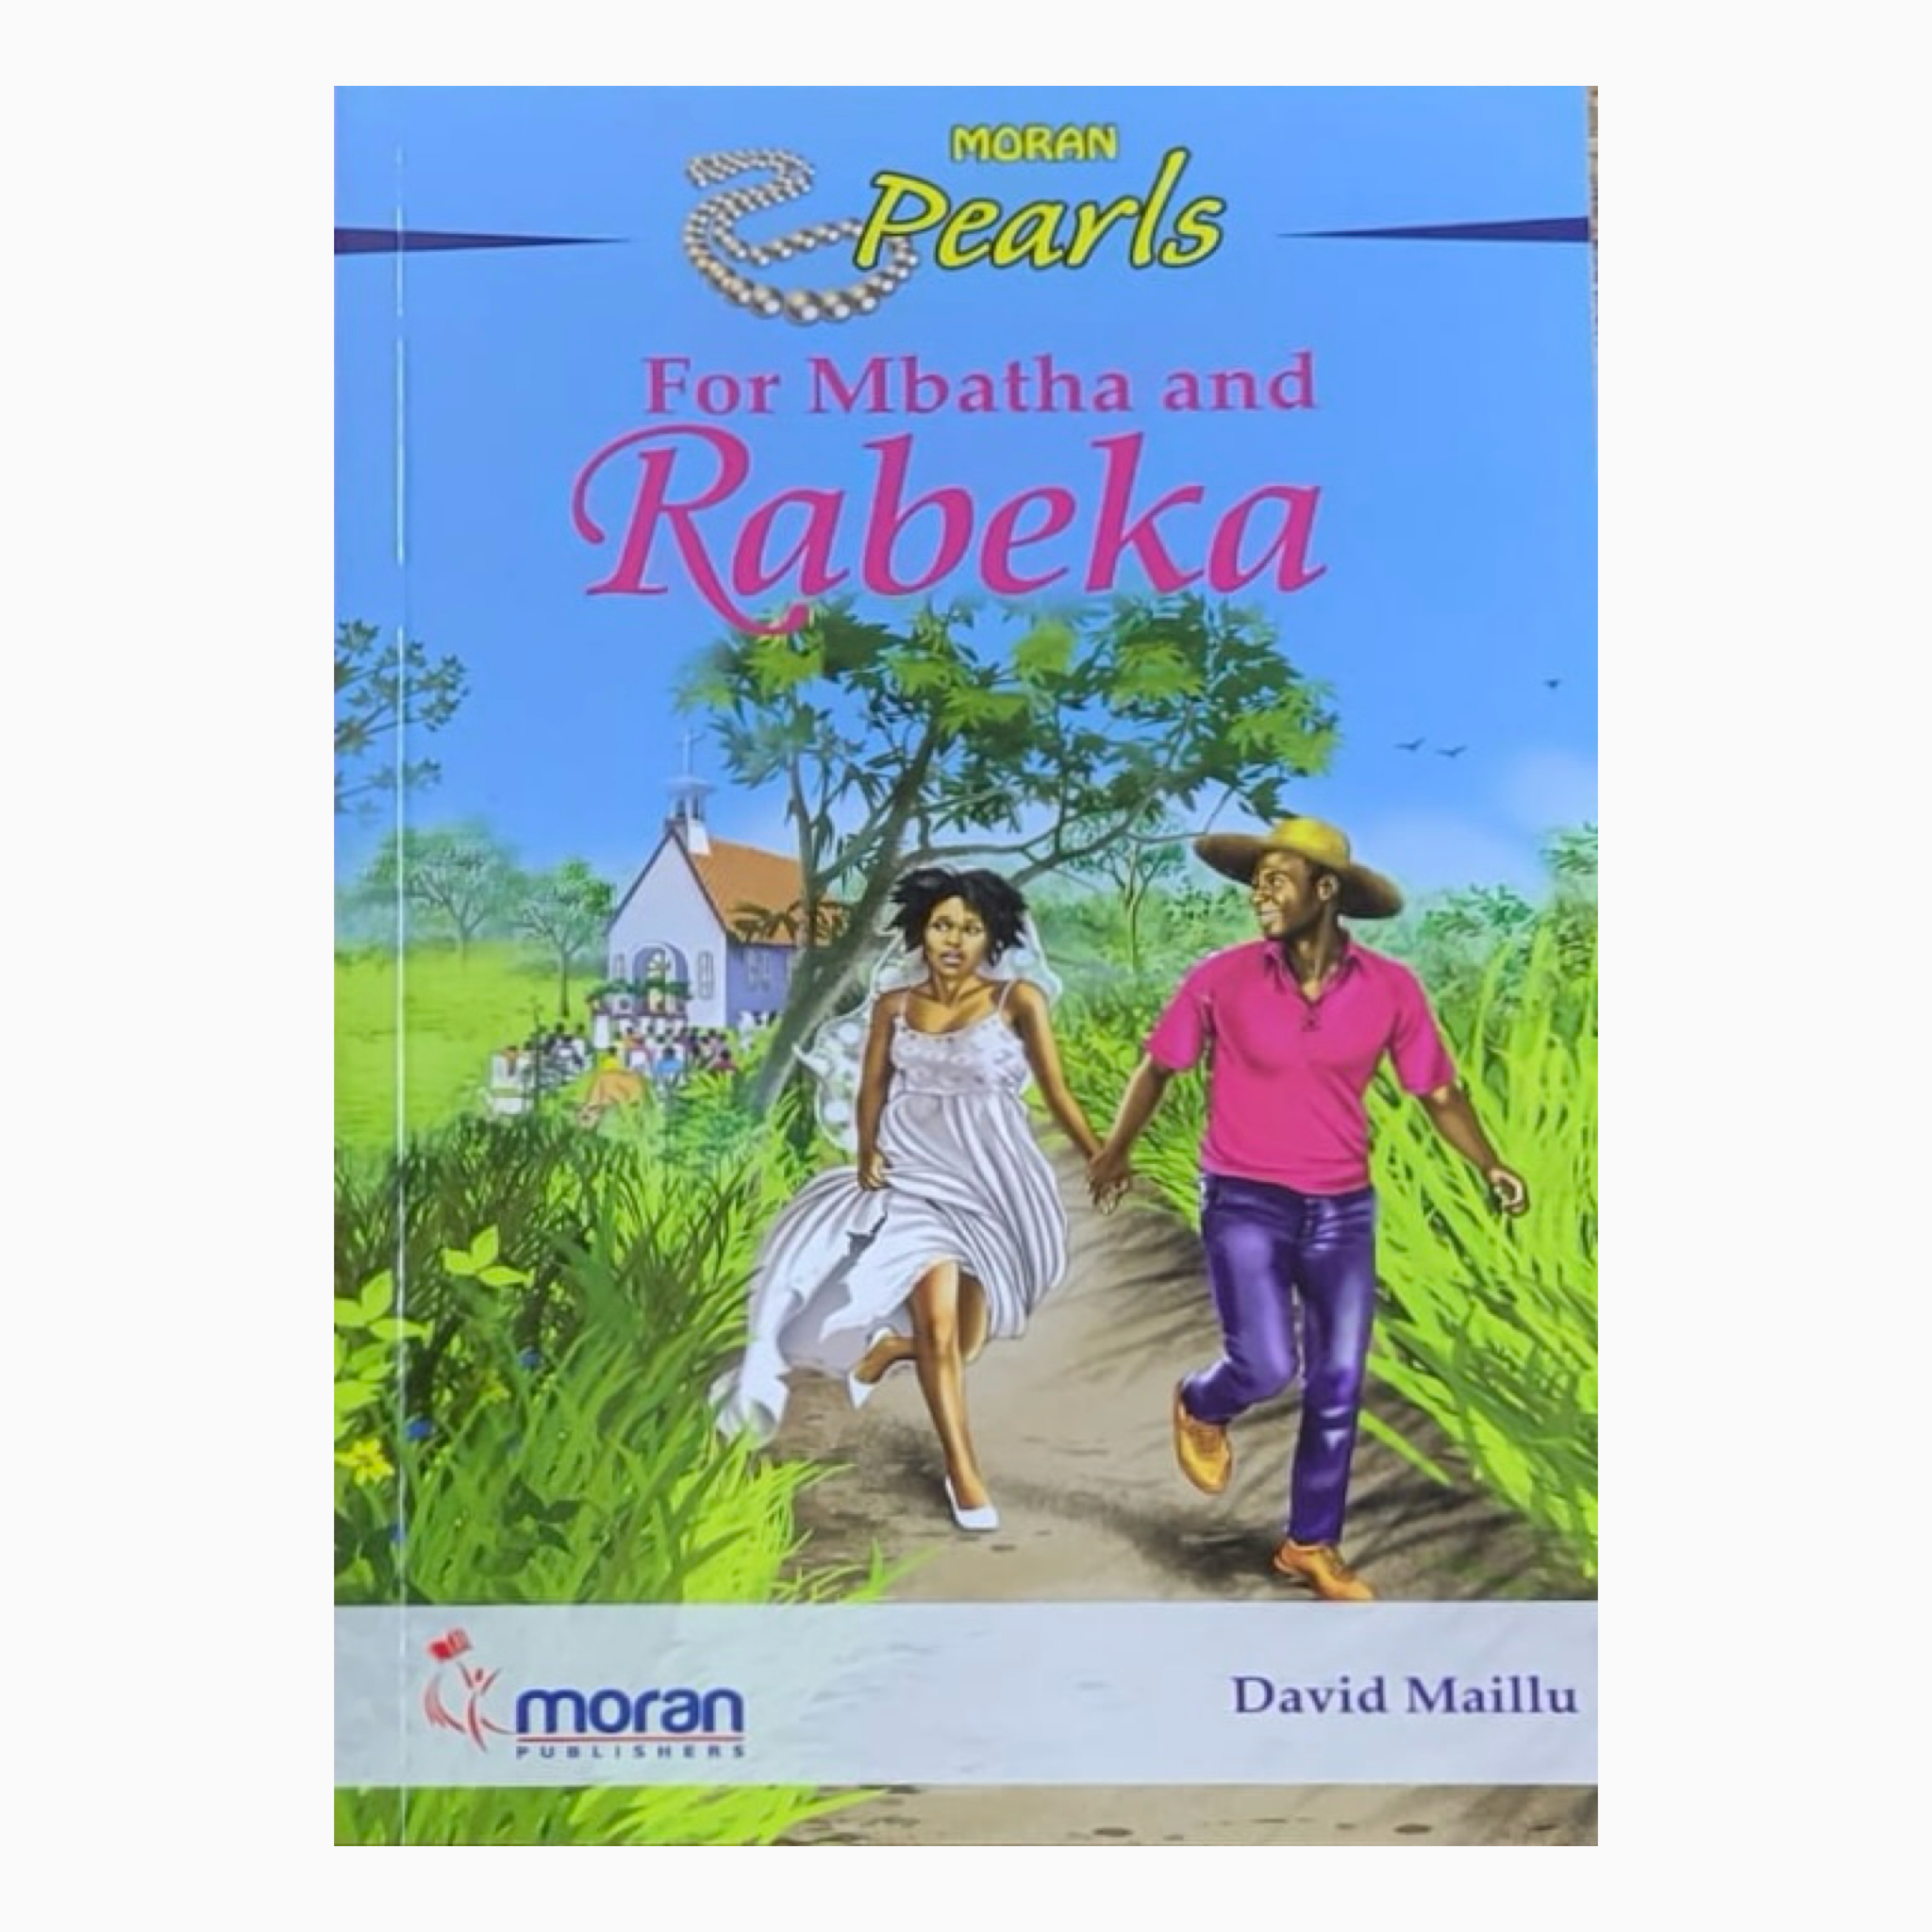 For Mbatha and Rabeka book by David G. Maillu